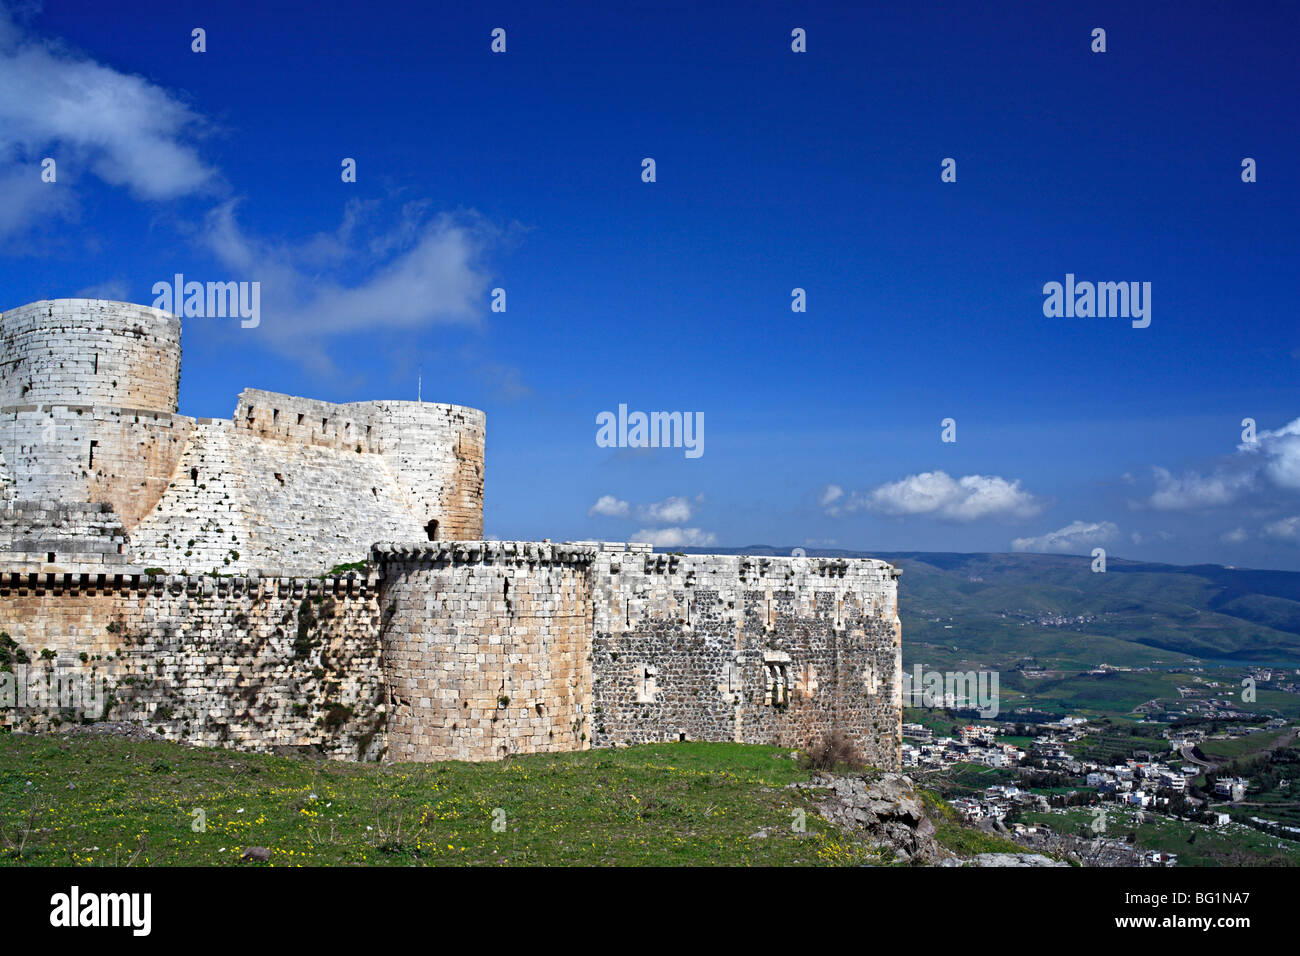 Crusaiders castle Krak des Chevaliers (Castle of the Knights), Qalaat al Hosn, (1140-1260), Syria Stock Photo